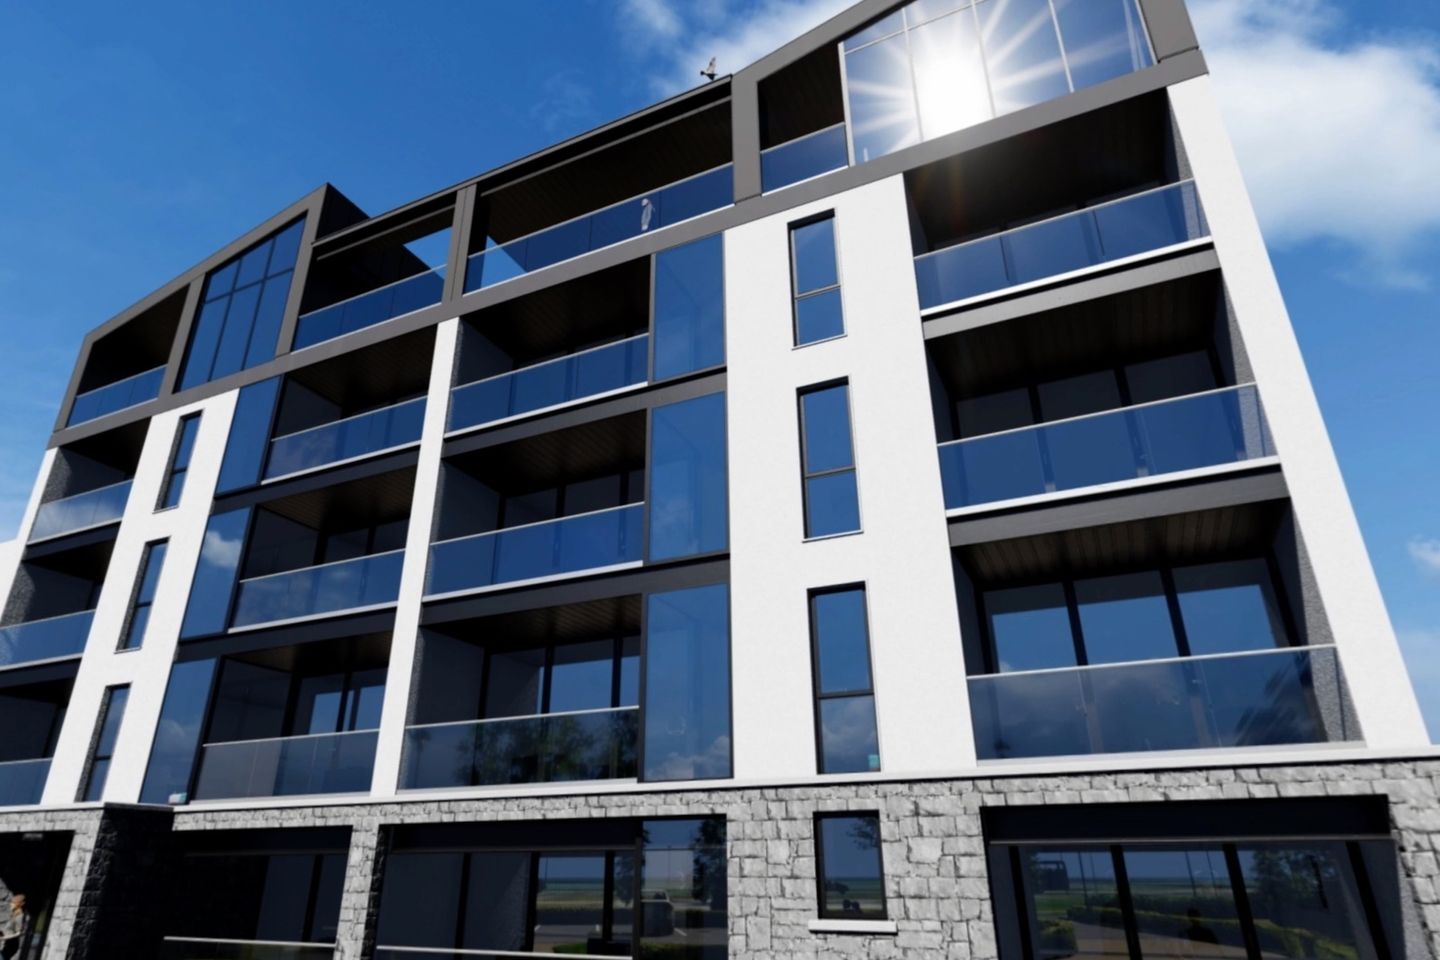 Shoreline Apartments, Quincentennial Drive, Salthill, Co. Galway